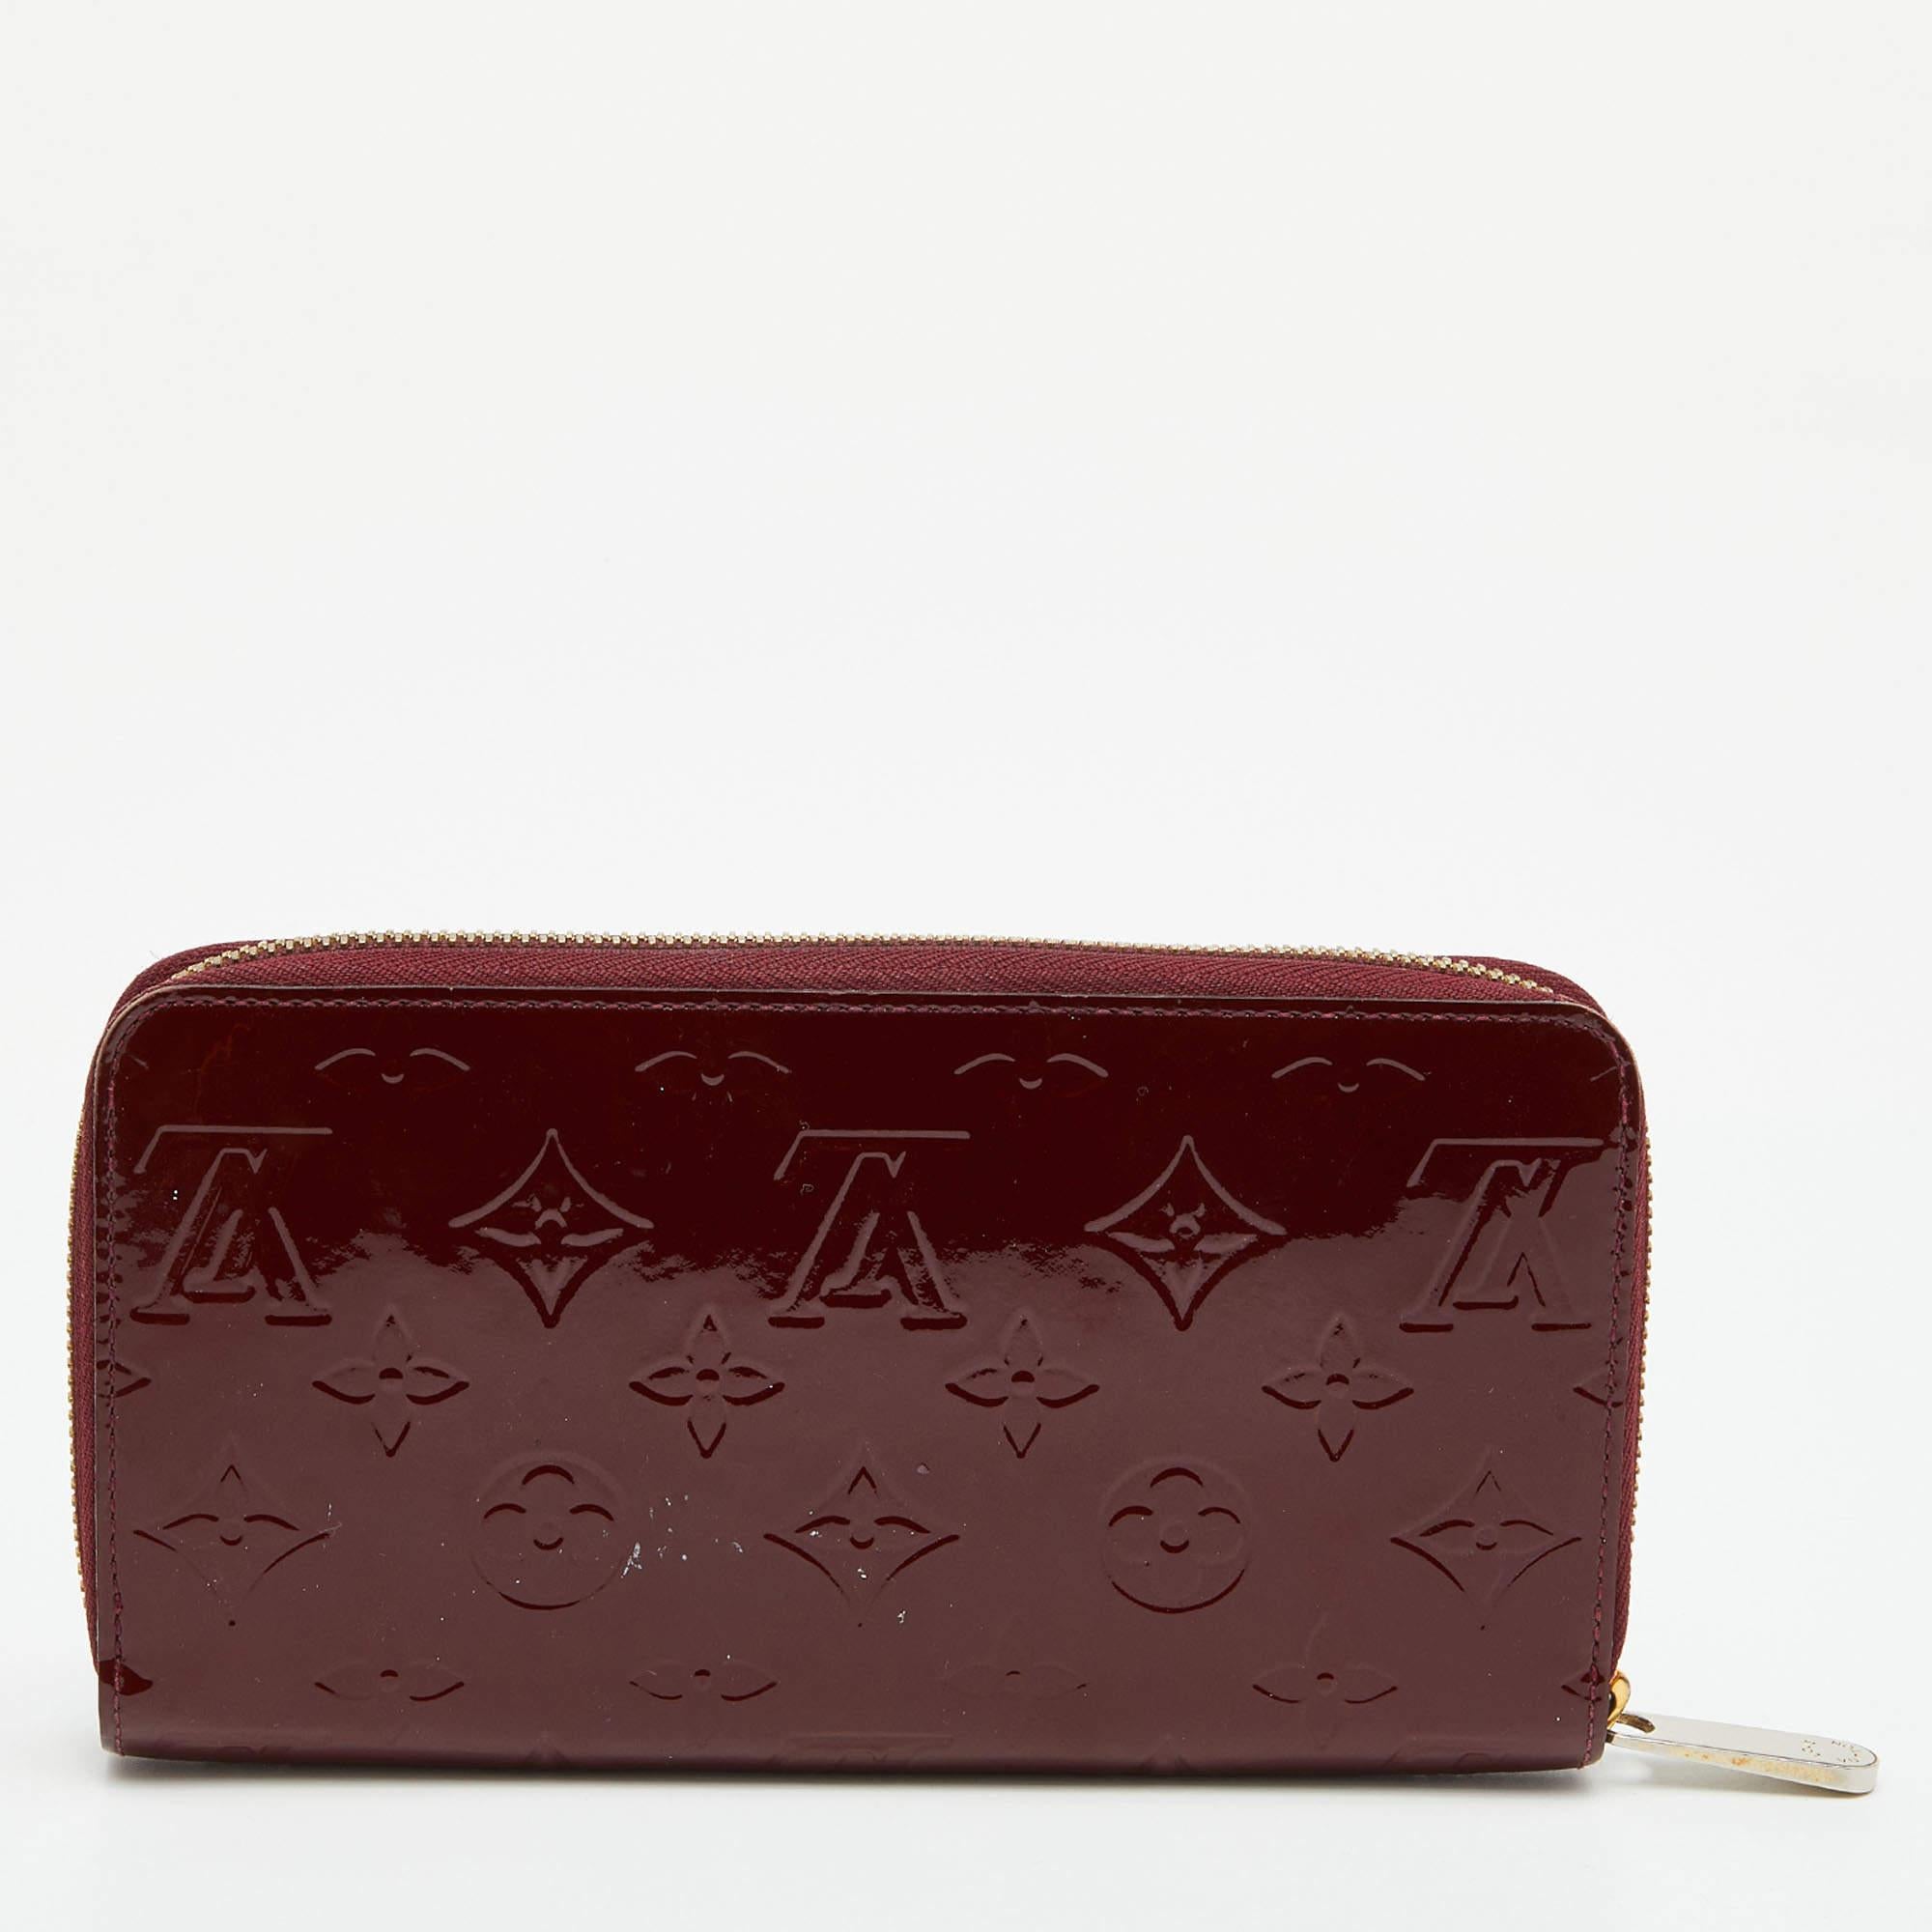 This Louis Vuitton Zippy wallet is conveniently designed for everyday use. Crafted from Griotte Monogram Vernis canvas, it is paired with a zip-around closure and gold-tone hardware. The compartmentalized interior of the wallet will store your card